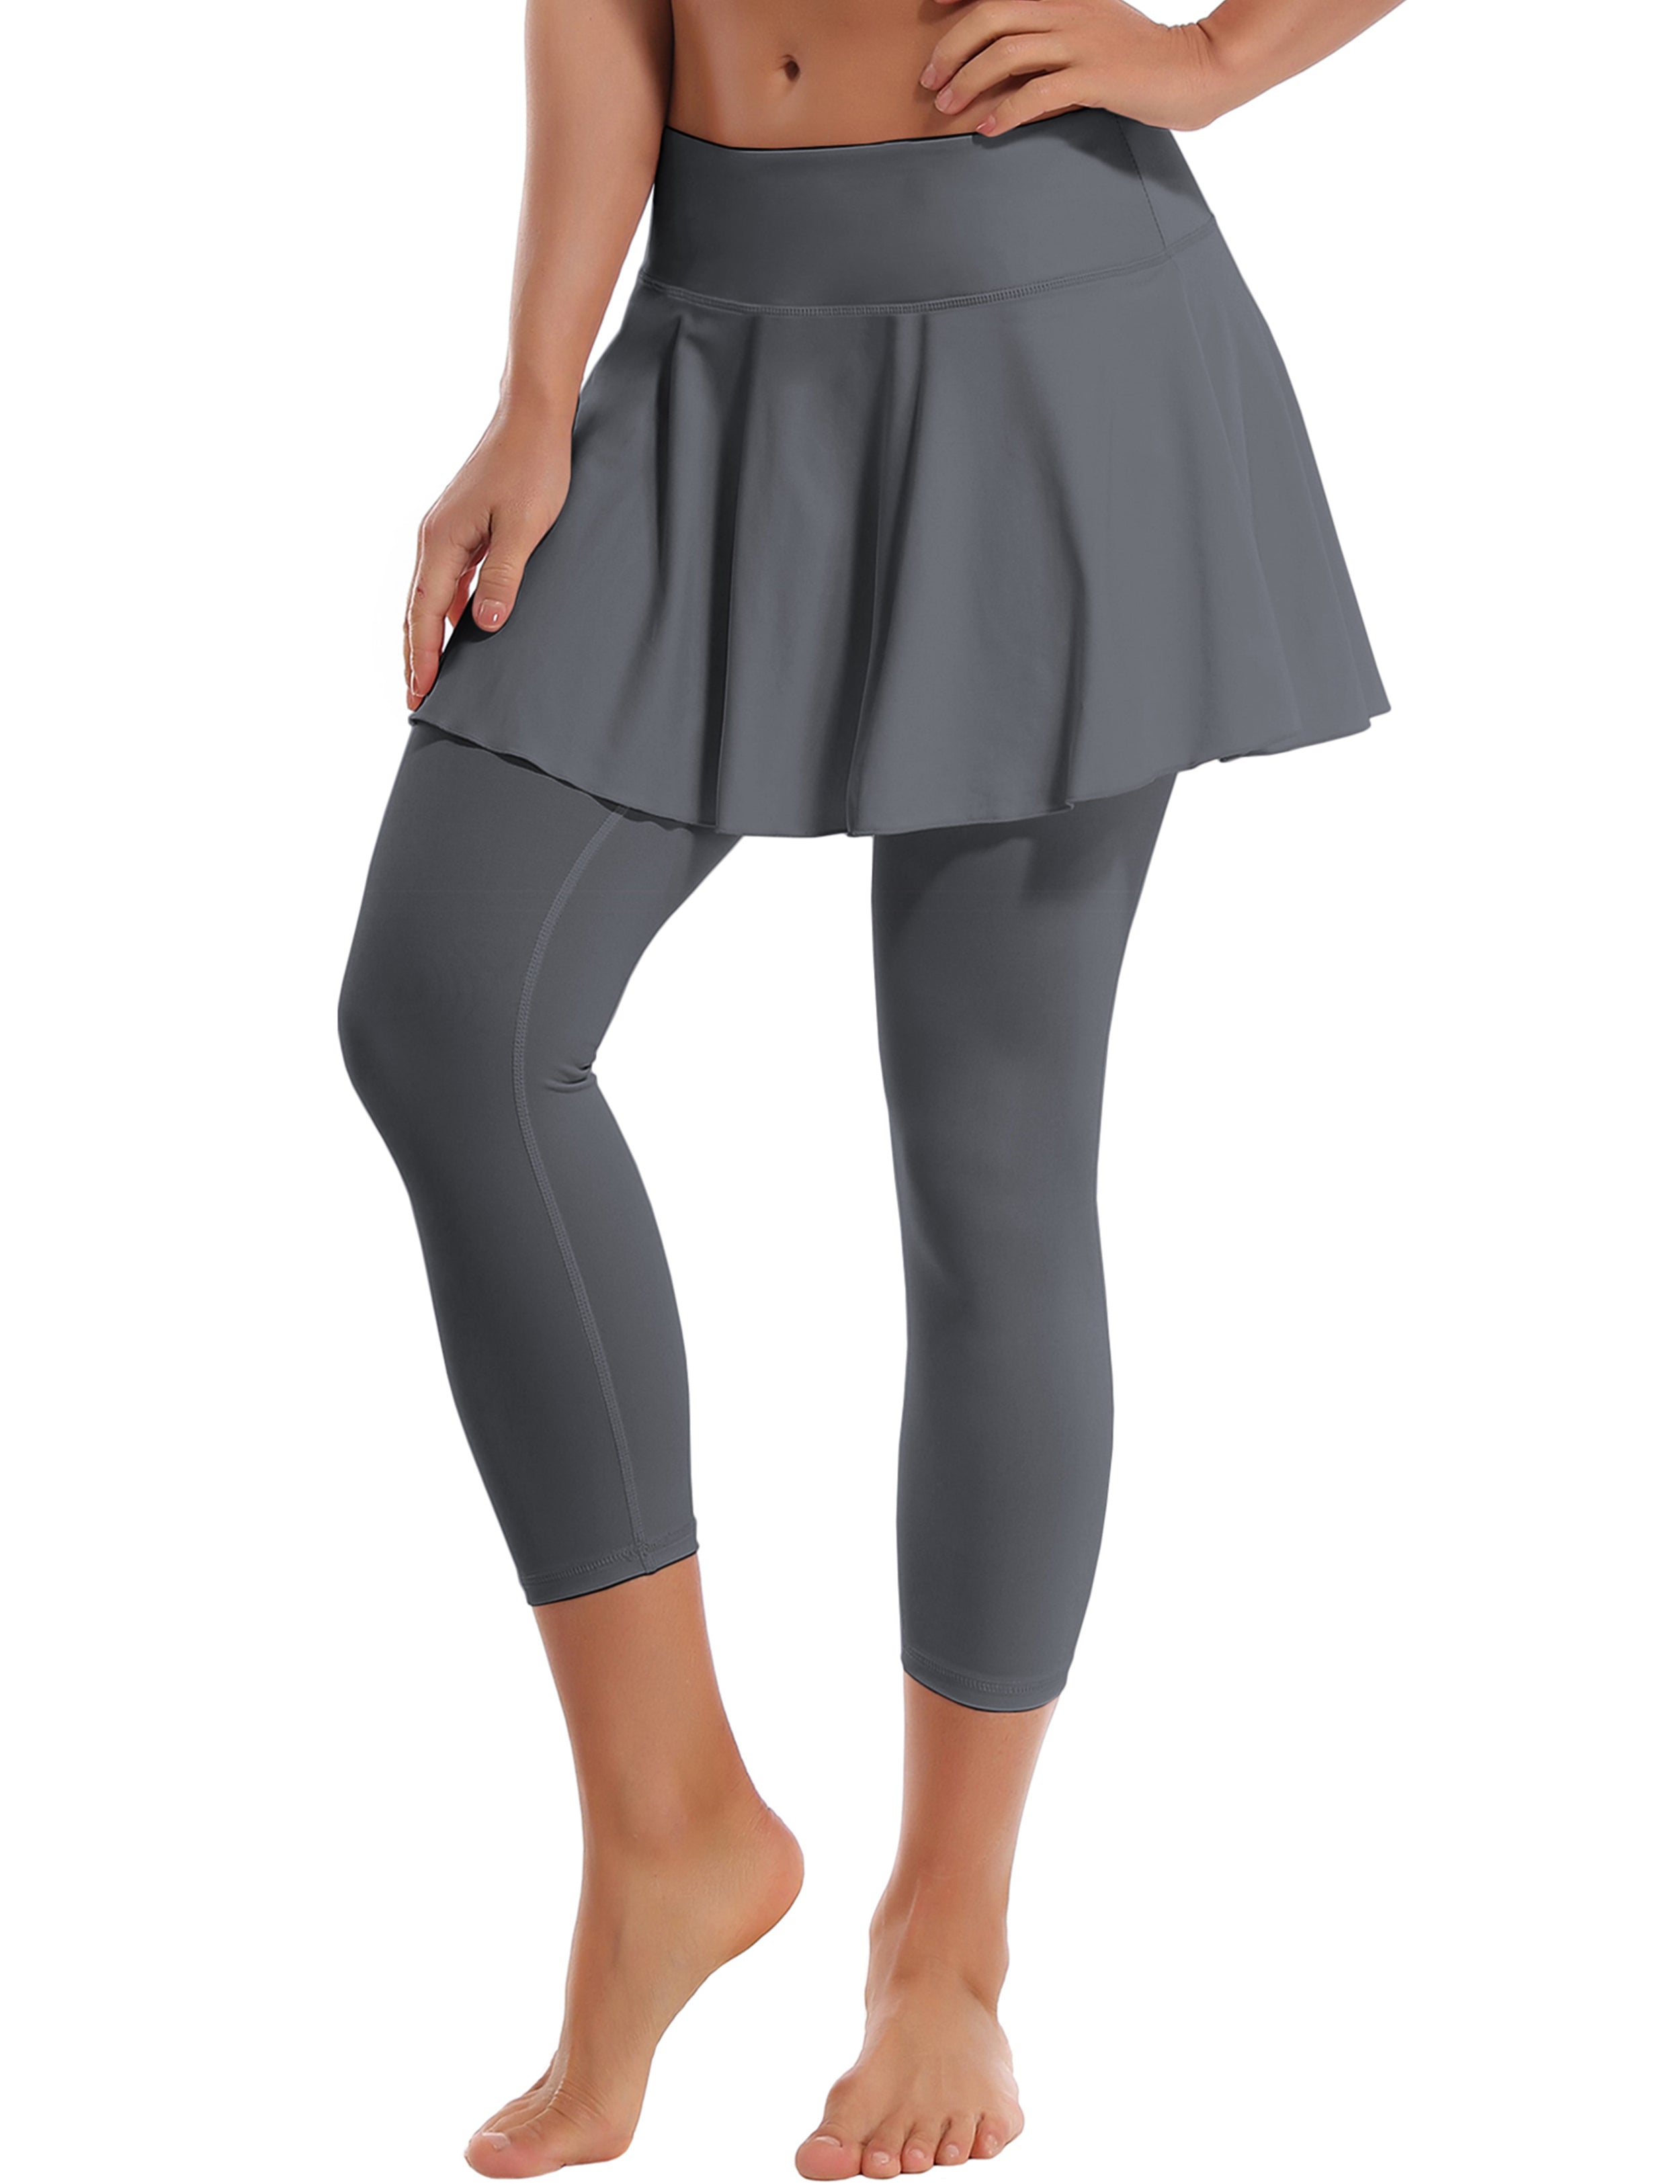 19" Capris Tennis Golf Skirted Leggings with Pockets gray 80%Nylon/20%Spandex UPF 50+ sun protection Elastic closure Lightweight, Wrinkle Moisture wicking Quick drying Secure & comfortable two layer Hidden pocket